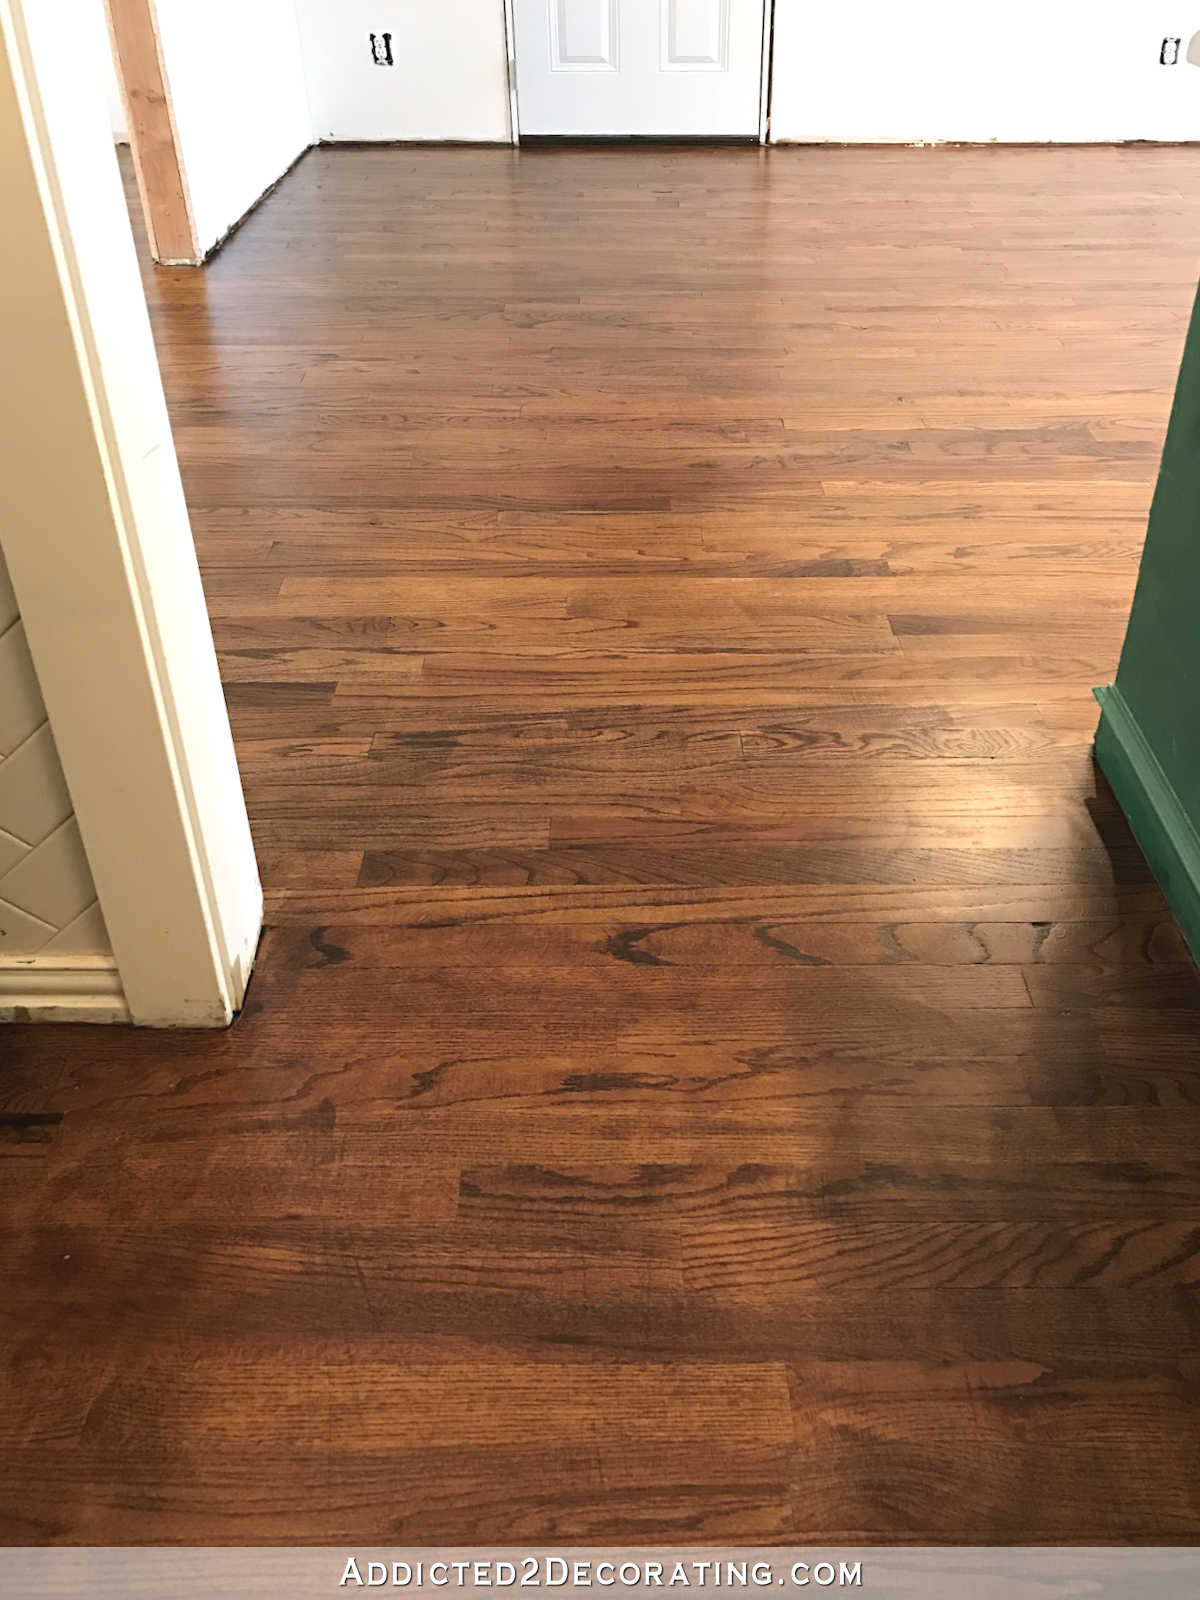 18 Unique Prefinished Hardwood Flooring Installation Cost Per Square Foot 2024 free download prefinished hardwood flooring installation cost per square foot of how to refinish wood floors step by step engineered hardwood floor throughout how to refinish wood floors step by step engi